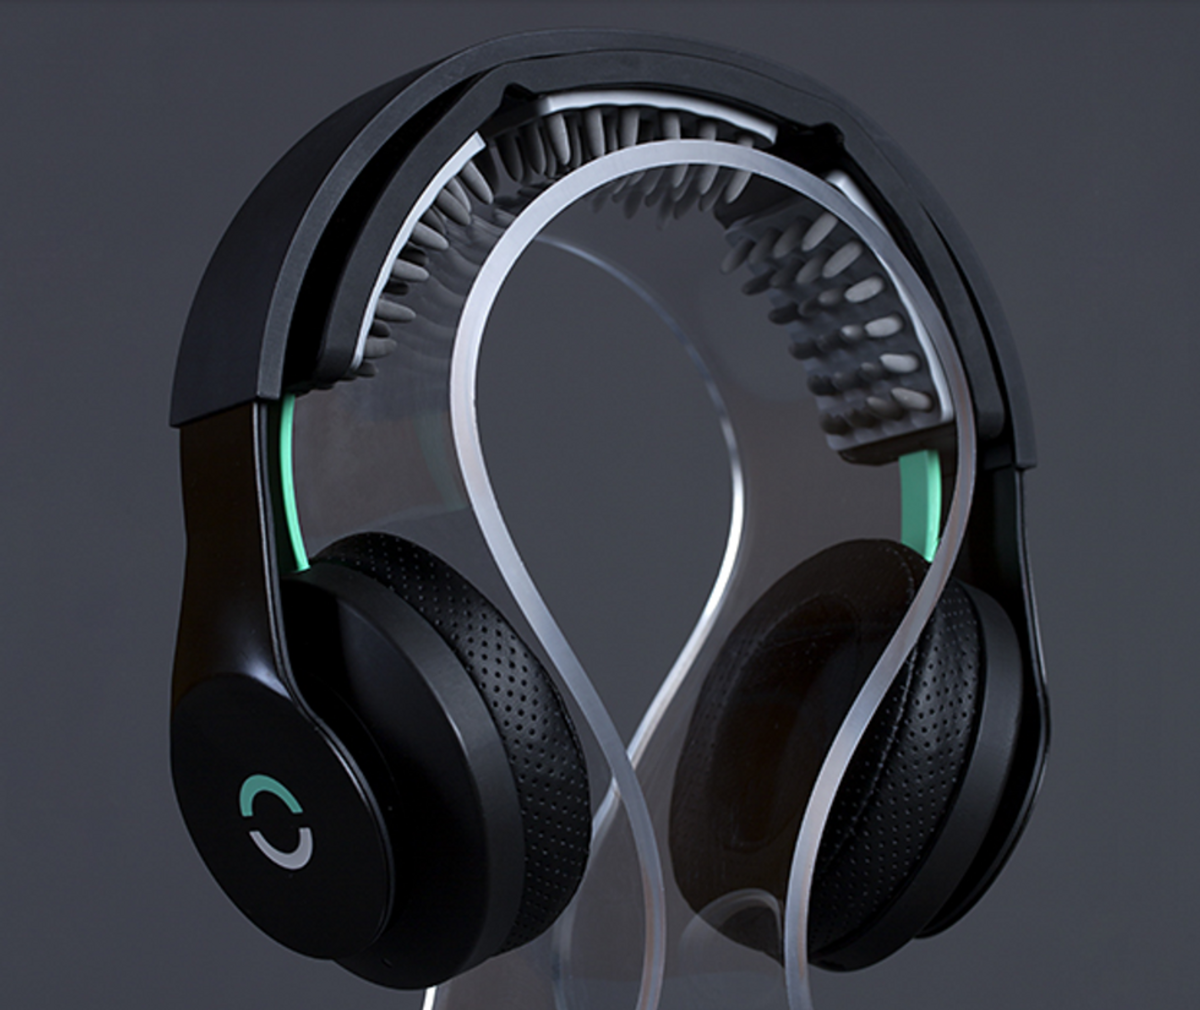 Startup Company Creates "Headphones" That Make You More Fit and Athletic